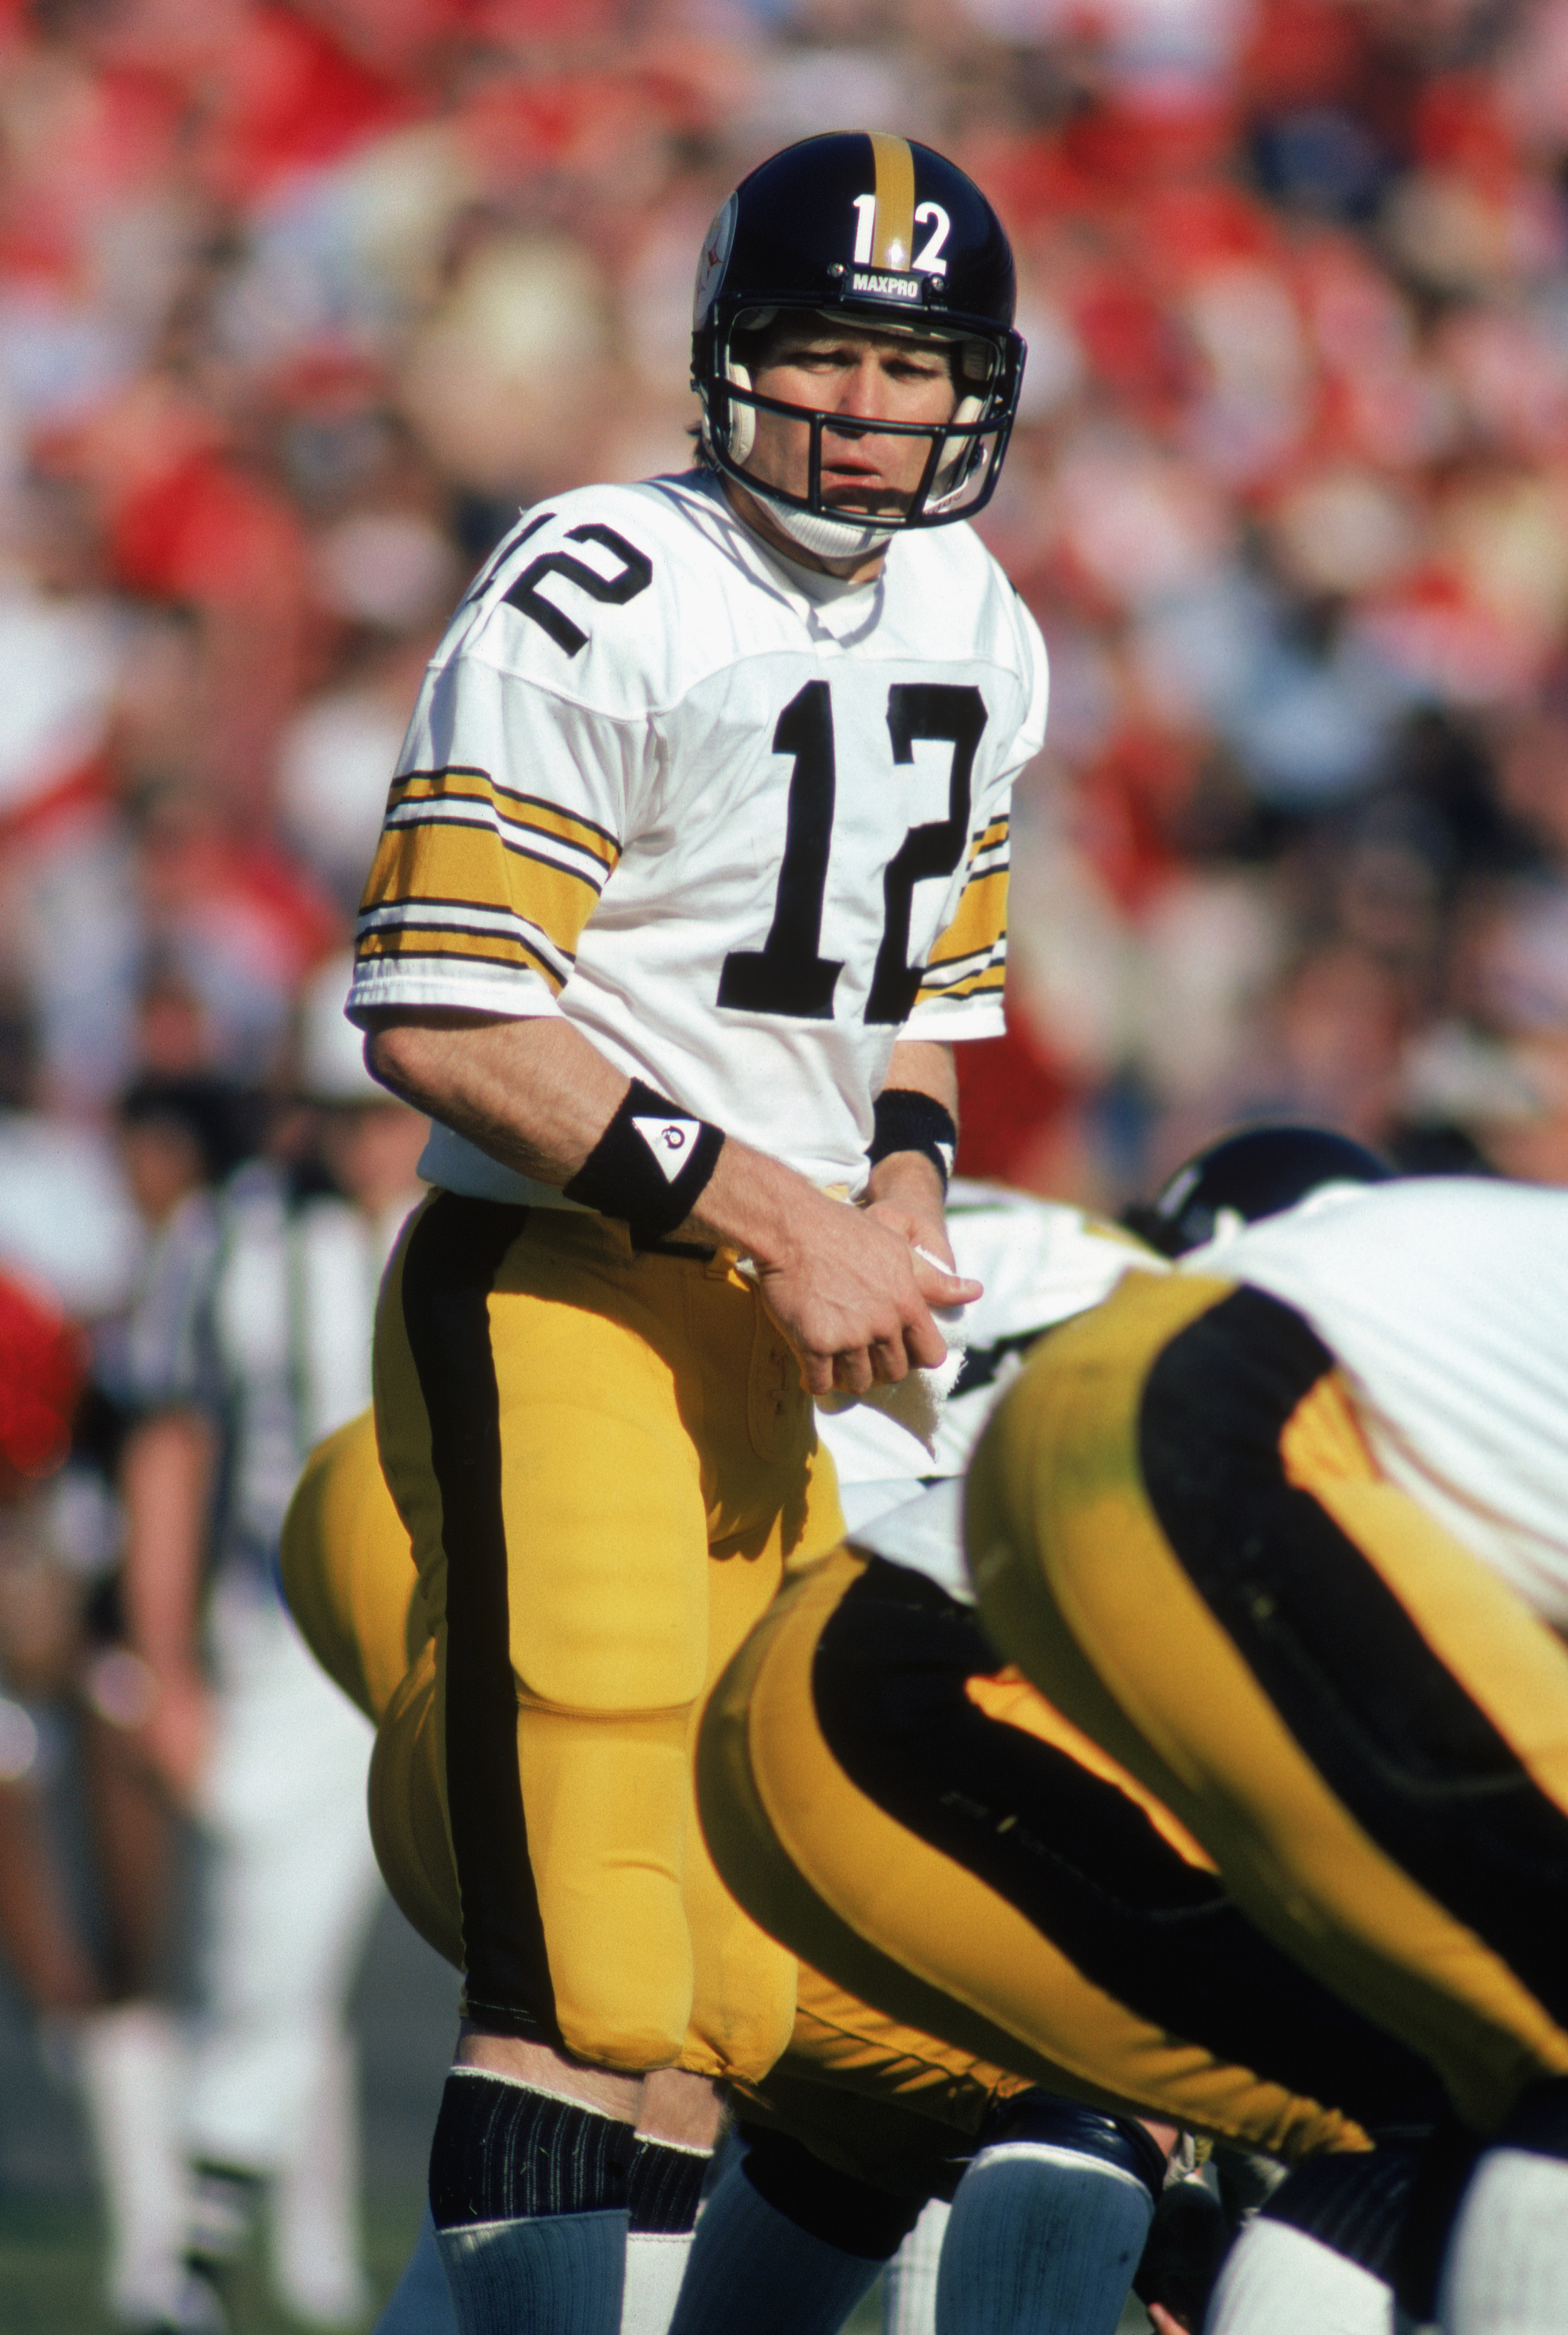 ATLANTA - NOVEMBER 1:  Quarterback Terry Bradshaw #12 of the Pittsburgh Steelers calls the play during the game against the Atlanta Falcons at Fulton County Stadium on November 1, 1981 in Atlanta, Georgia. The Steelers defeated the Falcons 34-20.  (Photo